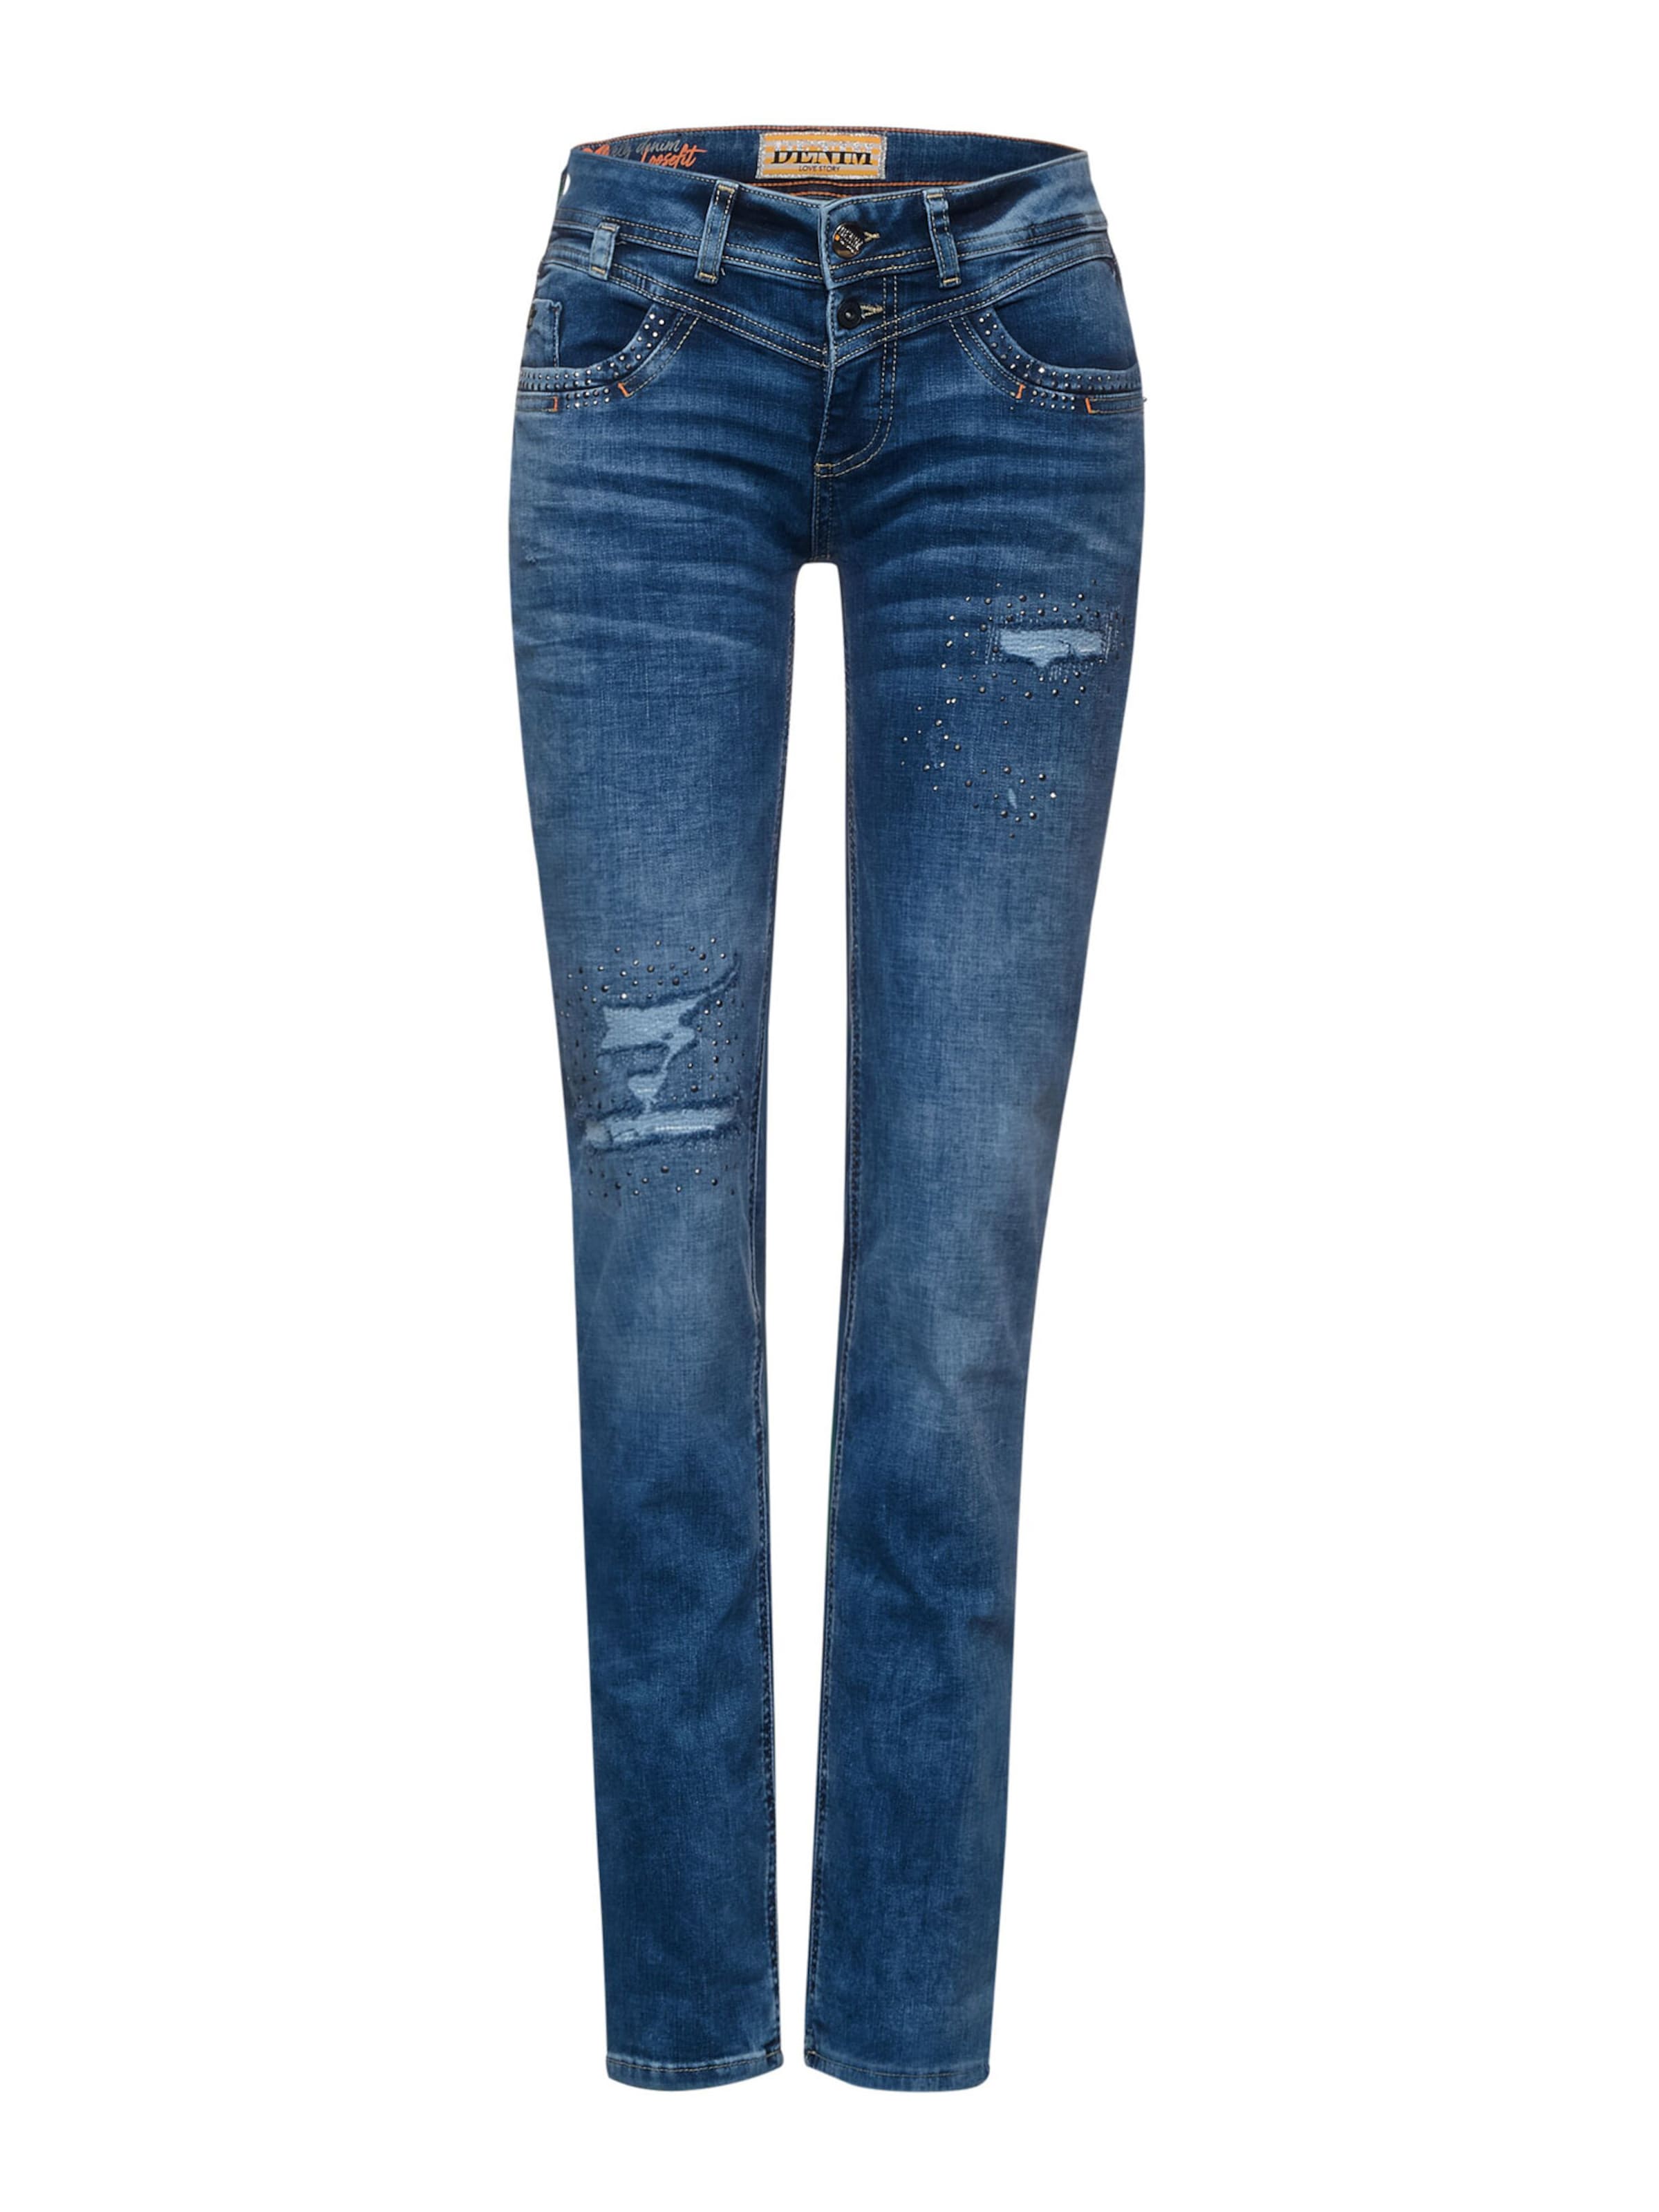 yHfpf Donna STREET ONE Jeans in Blu 